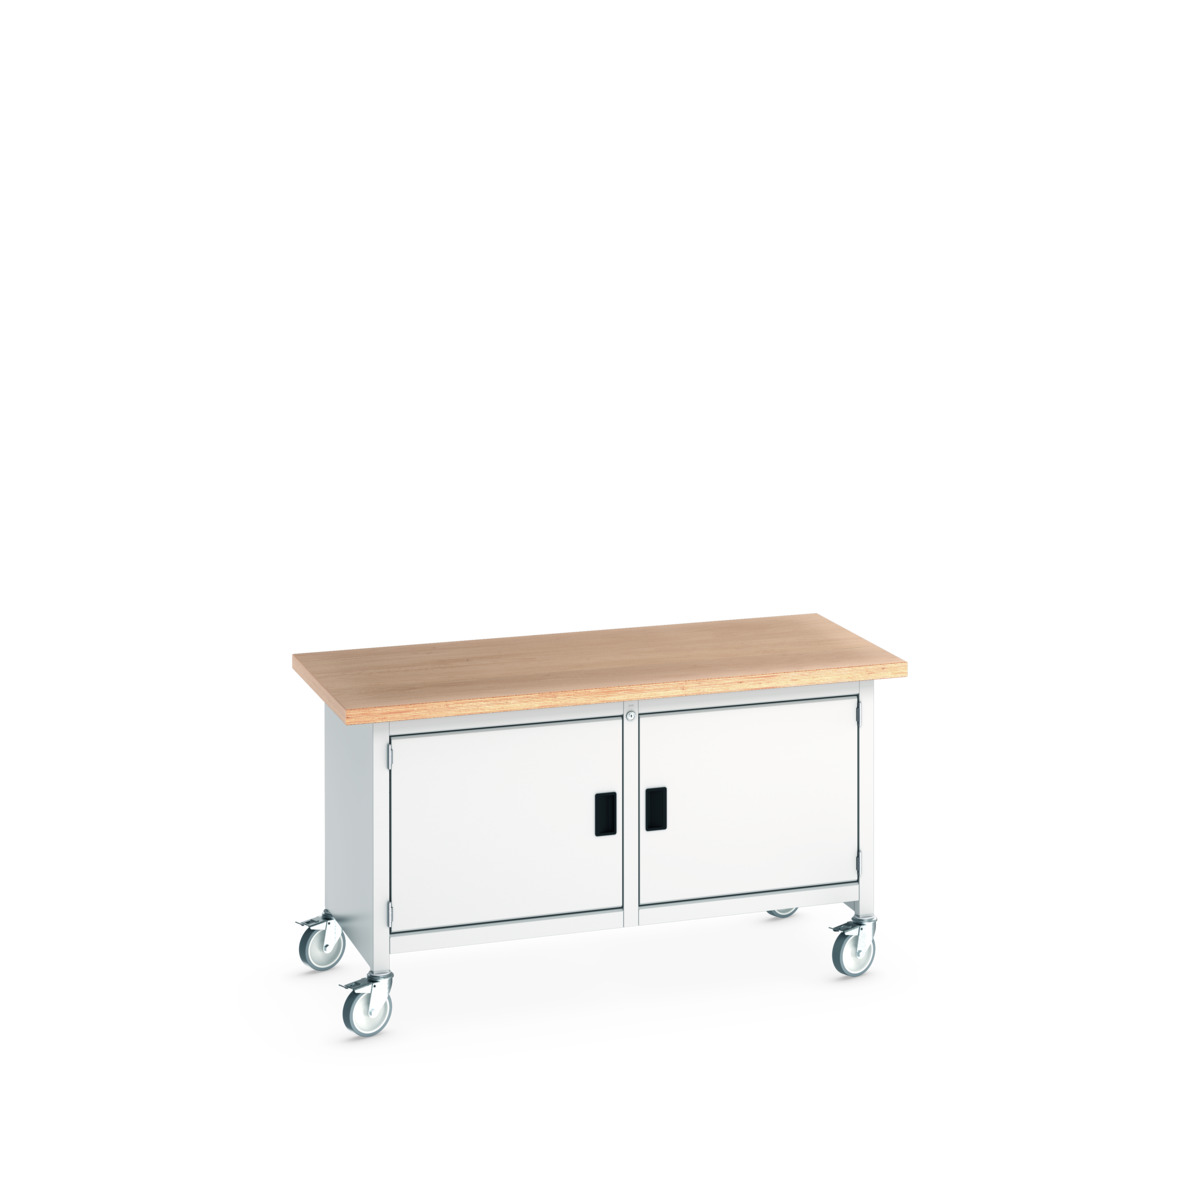 41002097.16V - cubio mobile storage bench (mpx)